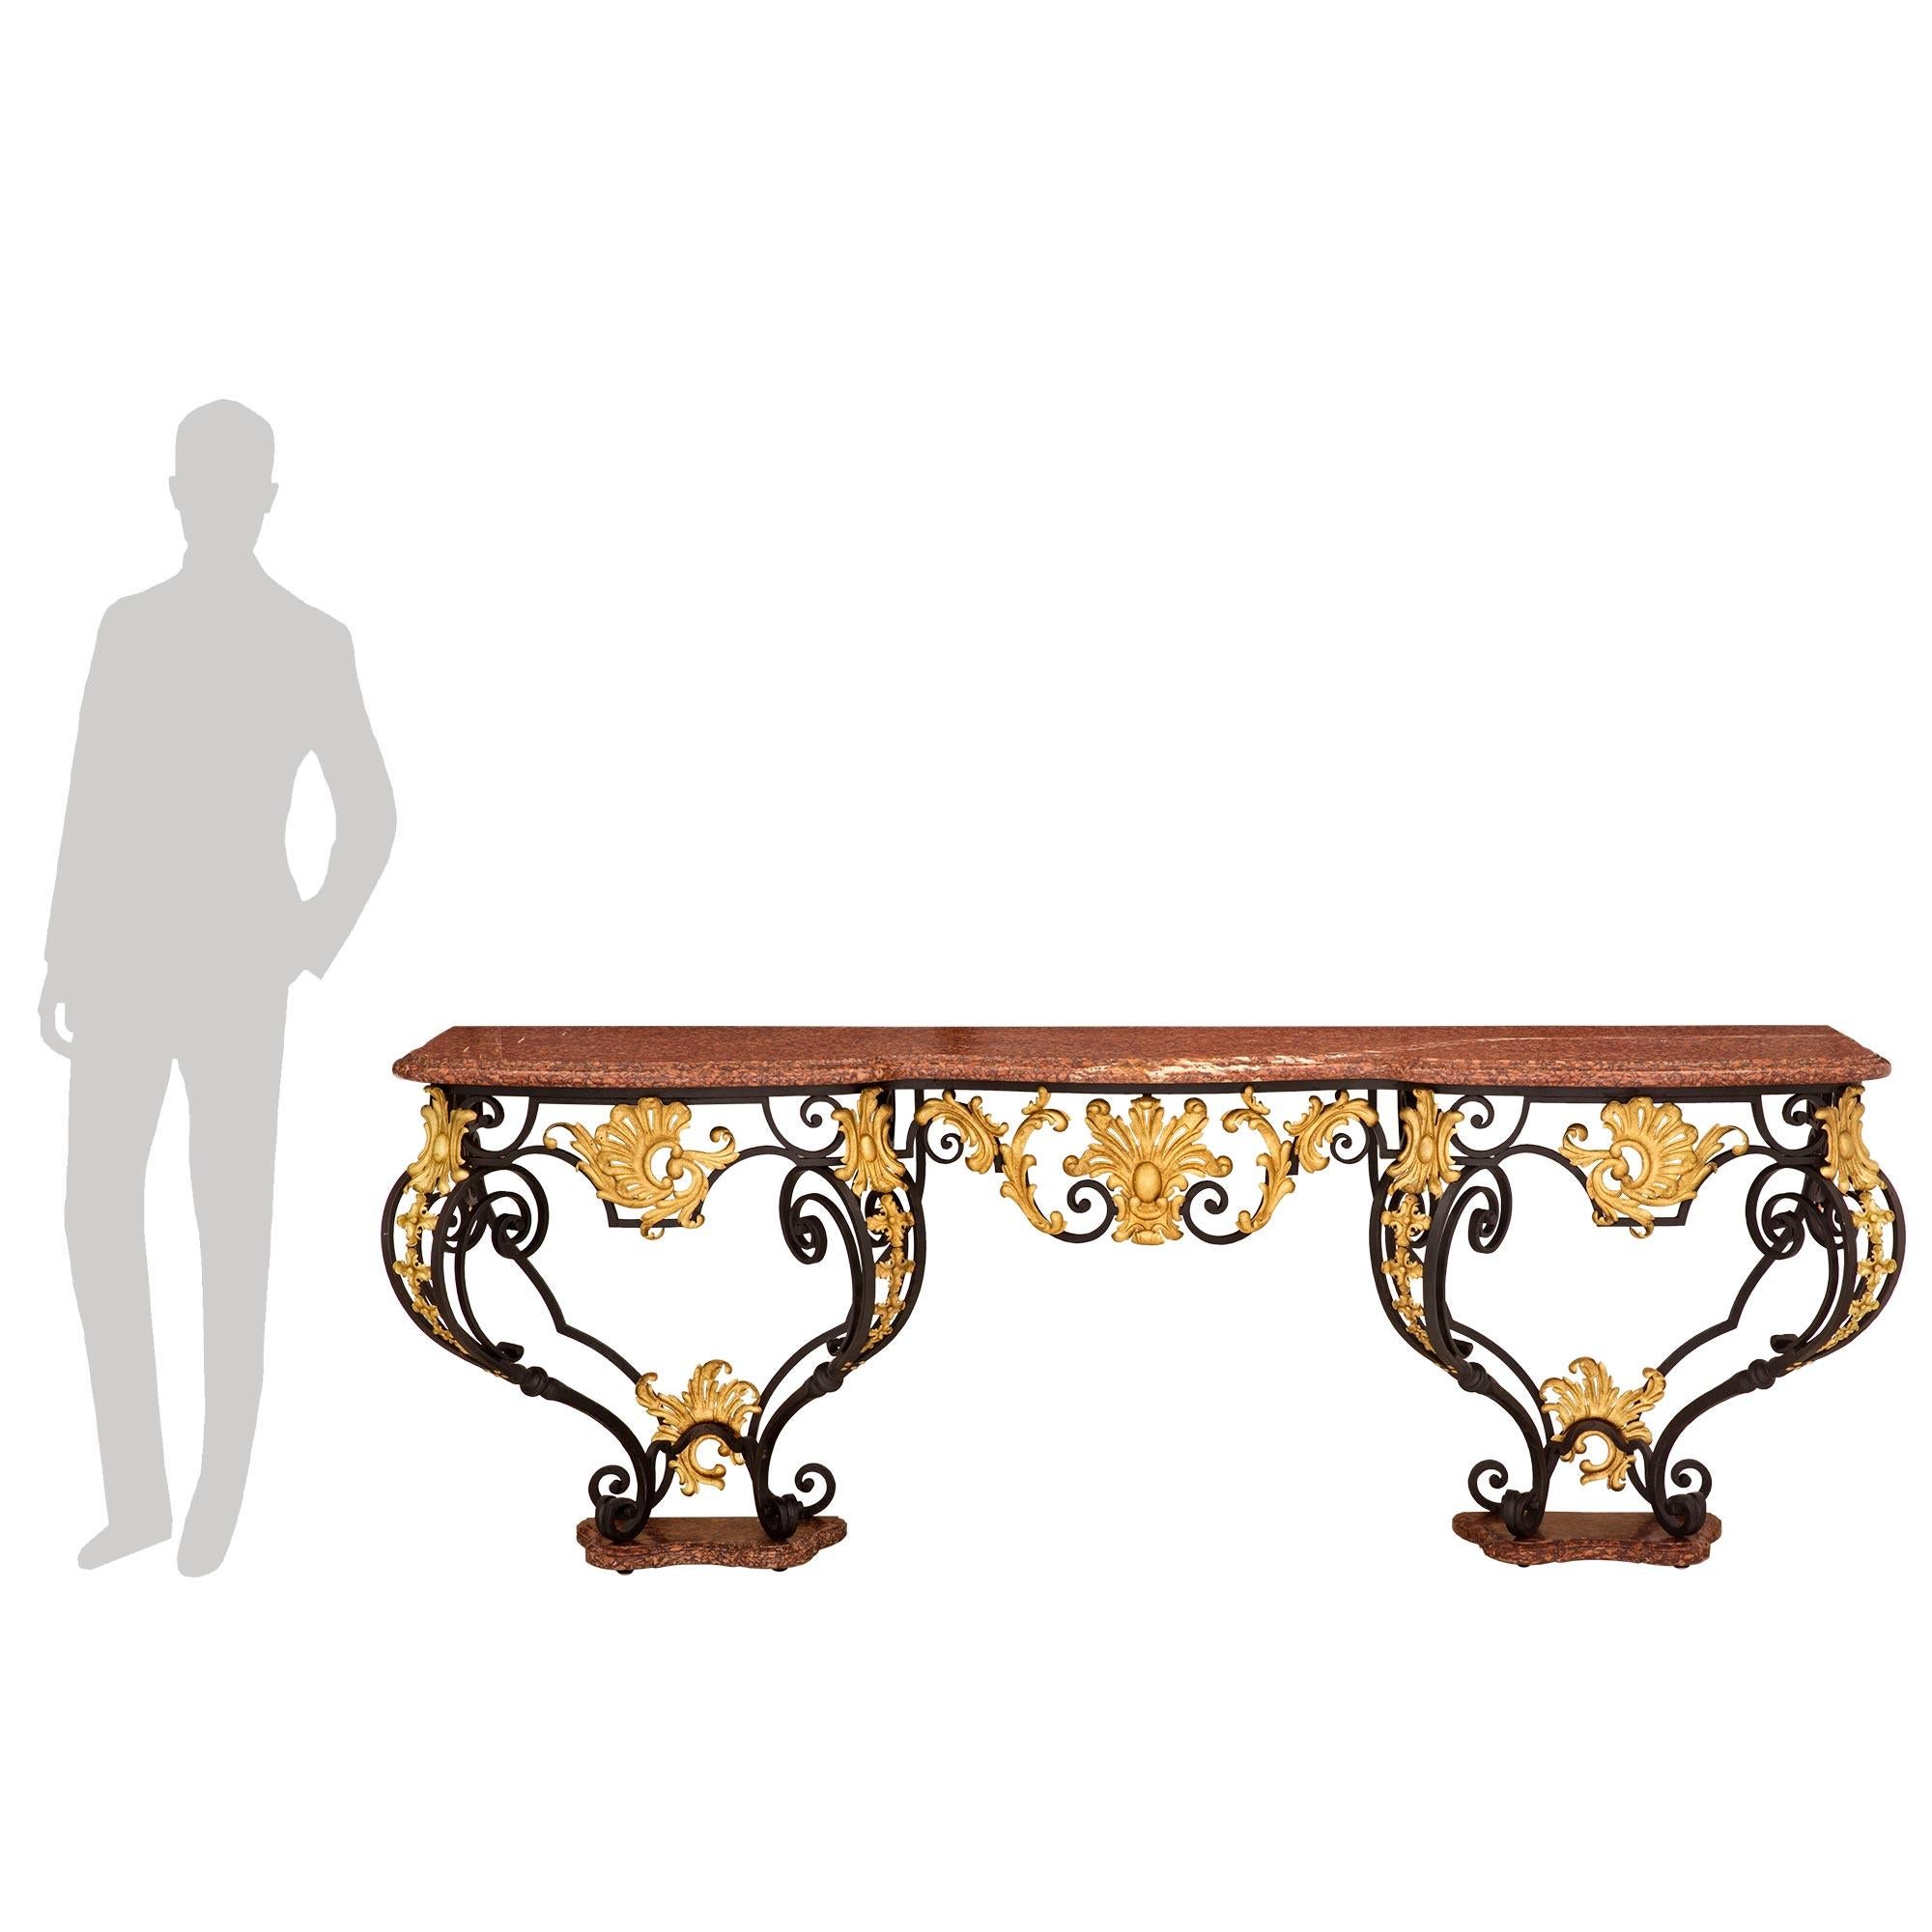 A stunning Italian 19th century Louis XV st. wrought iron, gilt metal, and Rouge Campan marble console. The most impressive wall mounted console is raised by unique marble feet with a most decorative scalloped shape, a mottled border, and fine iron